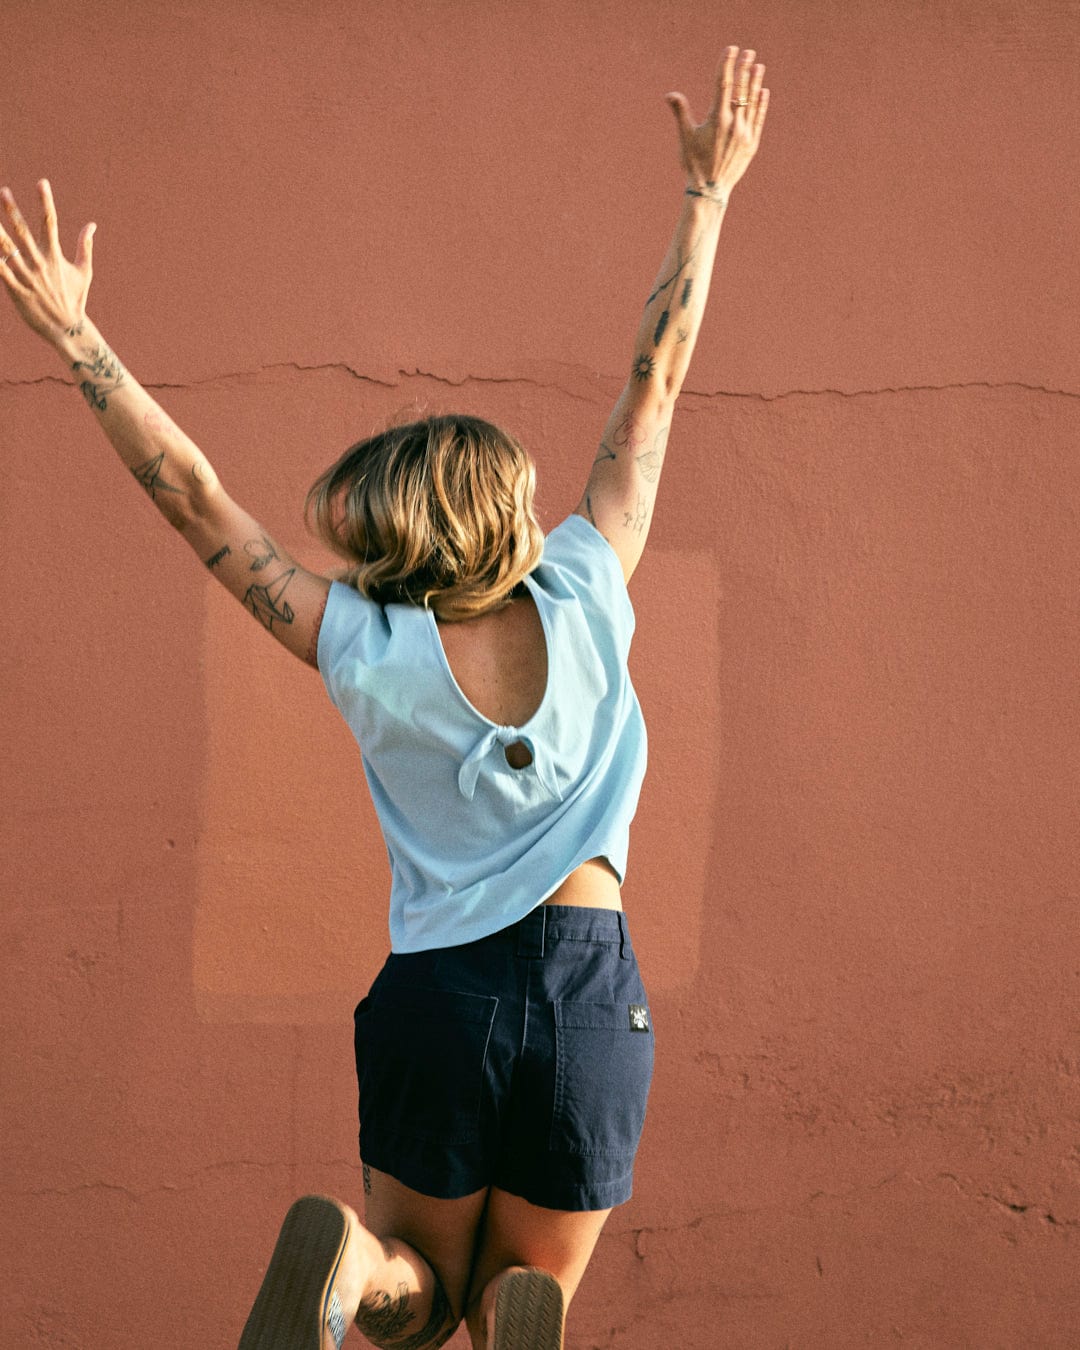 A person wearing a light blue, 100% cotton Rhoda - Womens T-Shirt - Light Blue by Saltrock with a dropped back detail and dark shorts is jumping with their arms raised against a pinkish wall. Tattoos are visible on both arms.